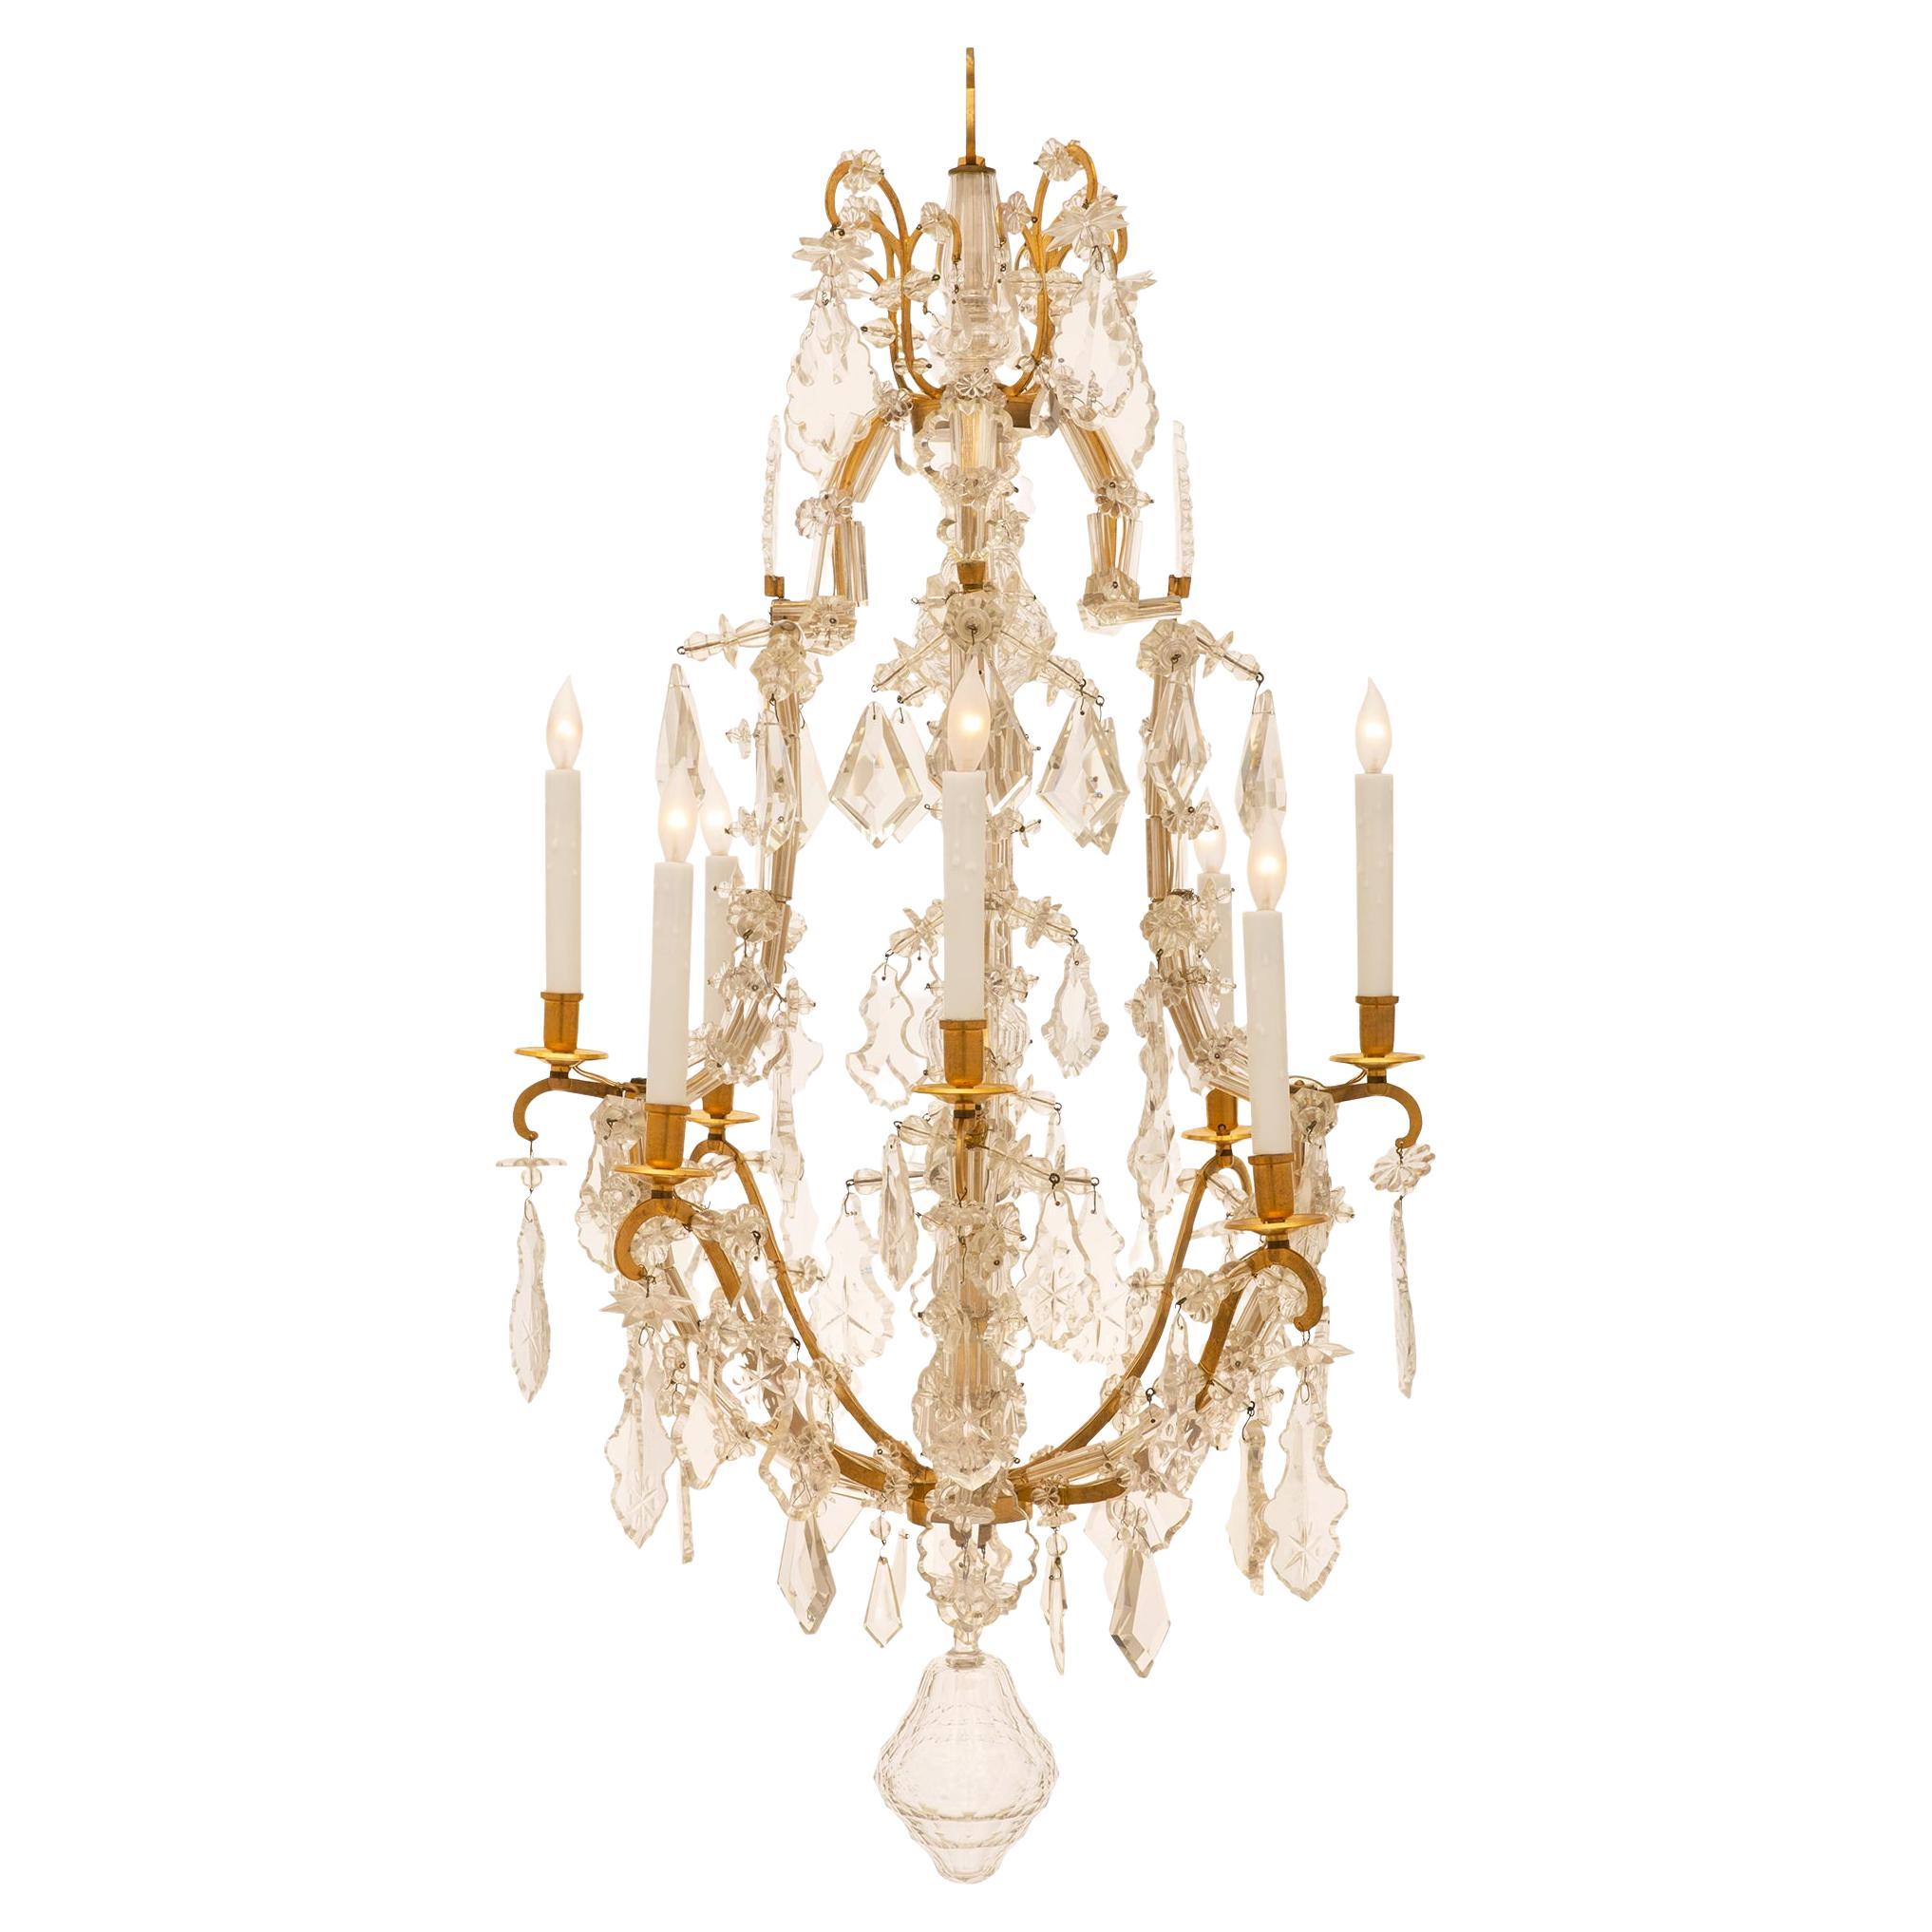 French Mid-19th Century Louis XV Style Ormolu and Baccarat Crystal Chandelier For Sale